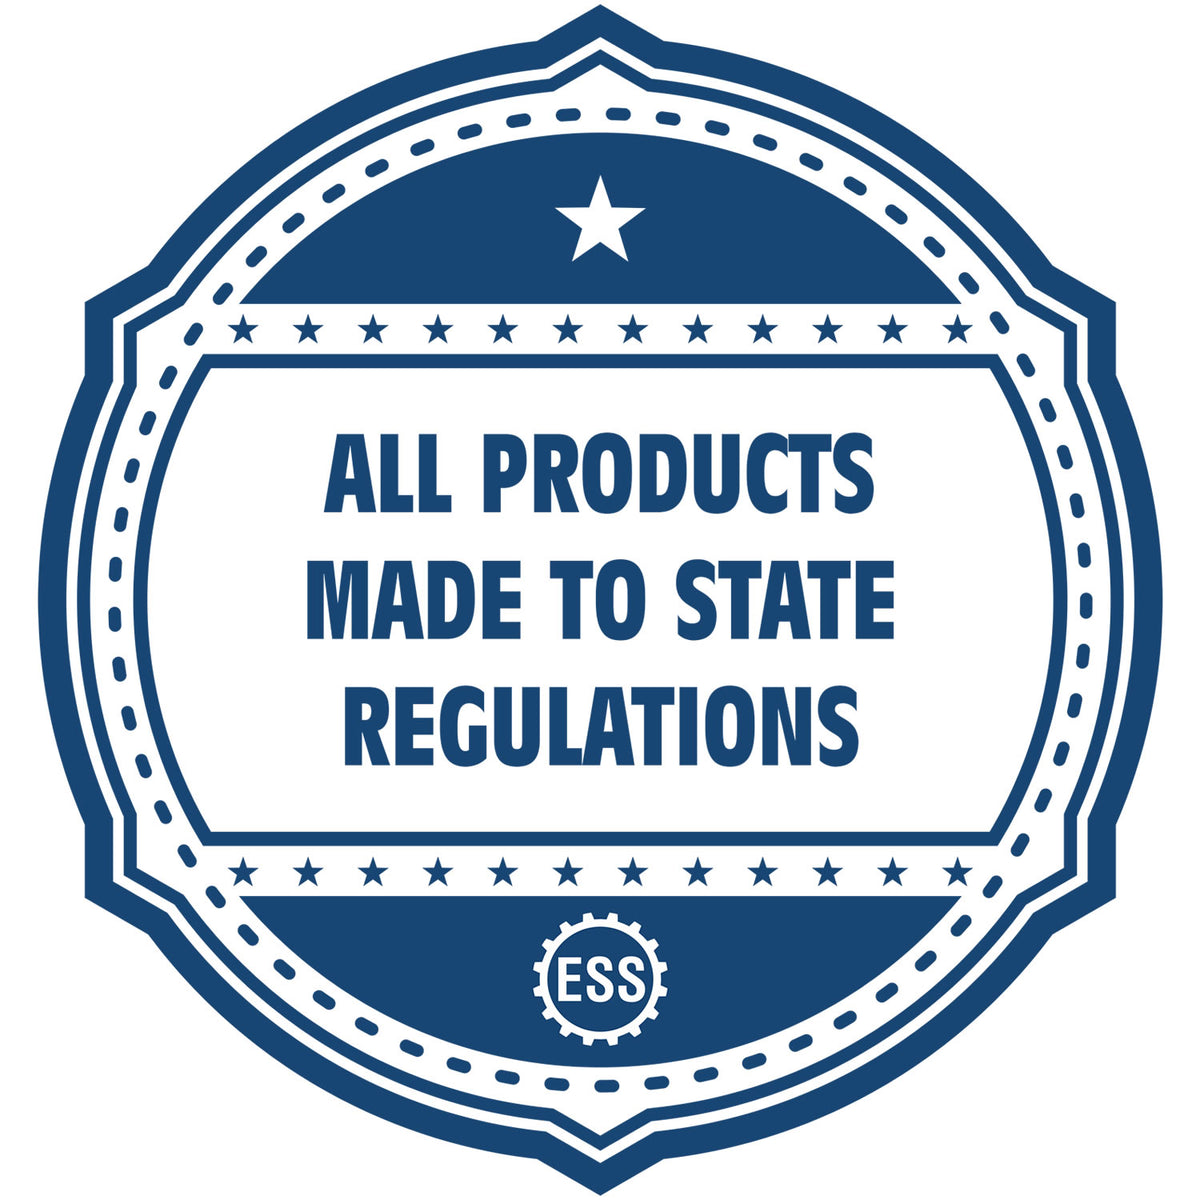 An icon or badge element for the Soft Pocket Pennsylvania Landscape Architect Embosser showing that this product is made in compliance with state regulations.